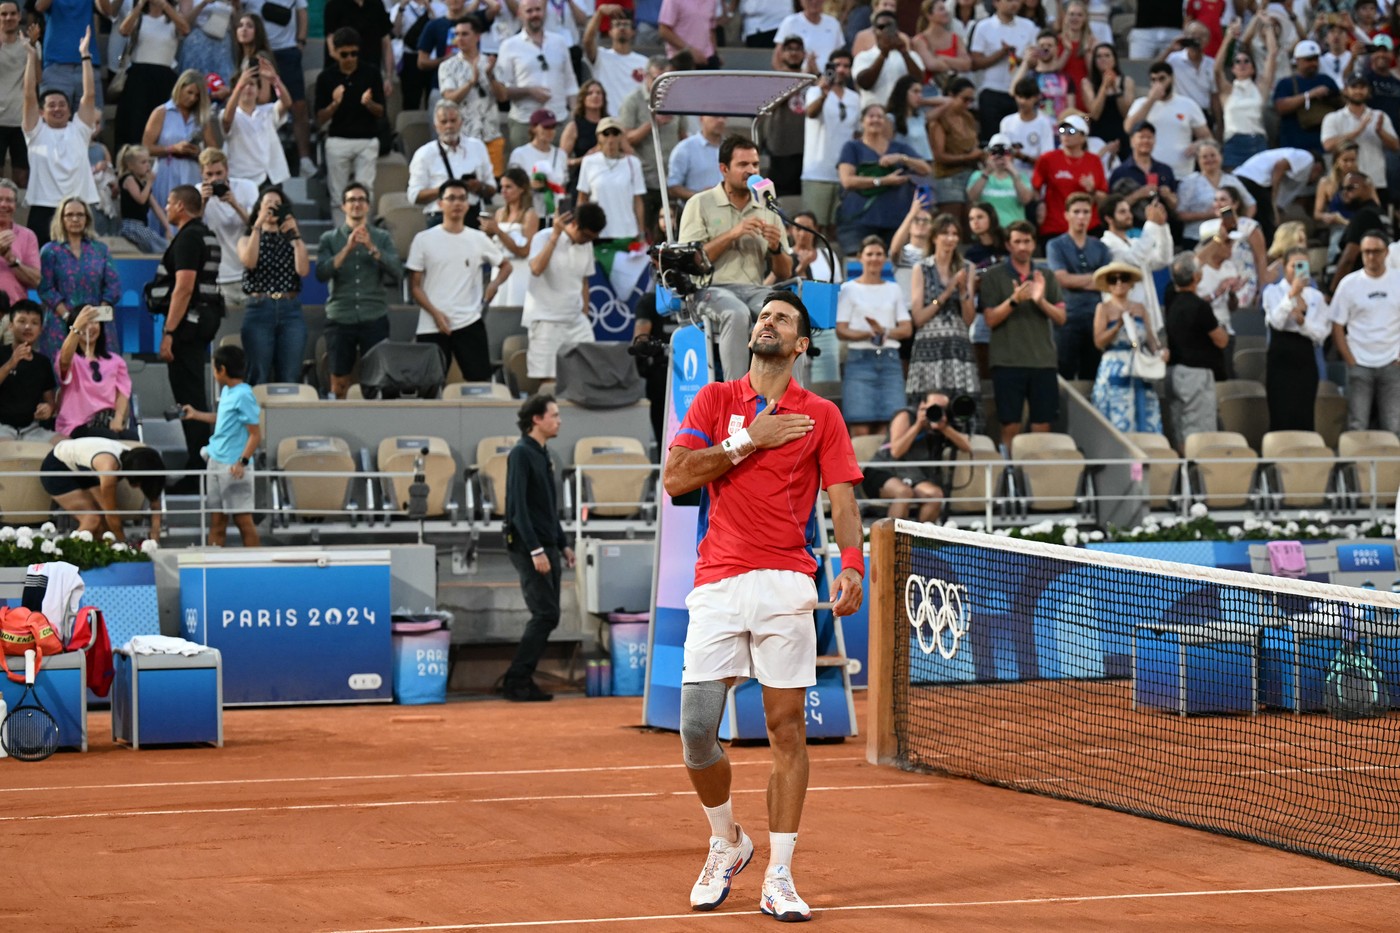 Serbia's Novak Djokovic celebrates beating Italy's Lorenzo Musetti during their men's singles semi-final tennis match on Court Philippe-Chatrier at the Roland-Garros Stadium during the Paris 2024 Olympic Games, in Paris on August 2, 2024.,Image: 895430504, License: Rights-managed, Restrictions: , Model Release: no